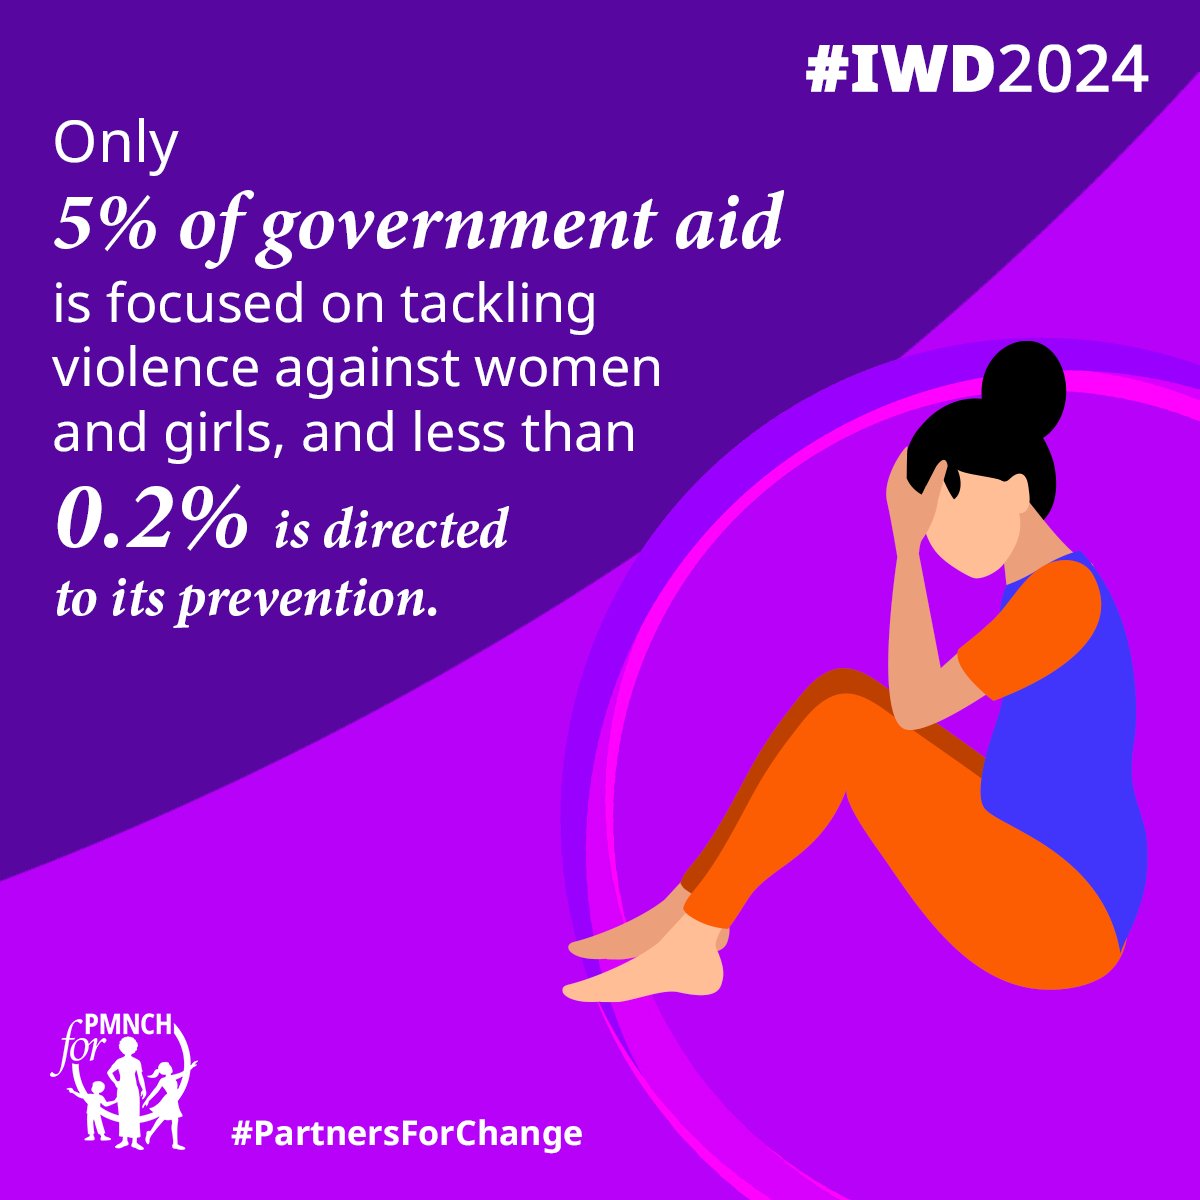 Without ambitious investments to scale-up prevention programmes, implement effective policies, & provide support services to address violence against women and girls, countries will fail to end gender-based violence by 2030. @UN_WOMEN @WEF @UNFPA @Womendeliver @world_midwives